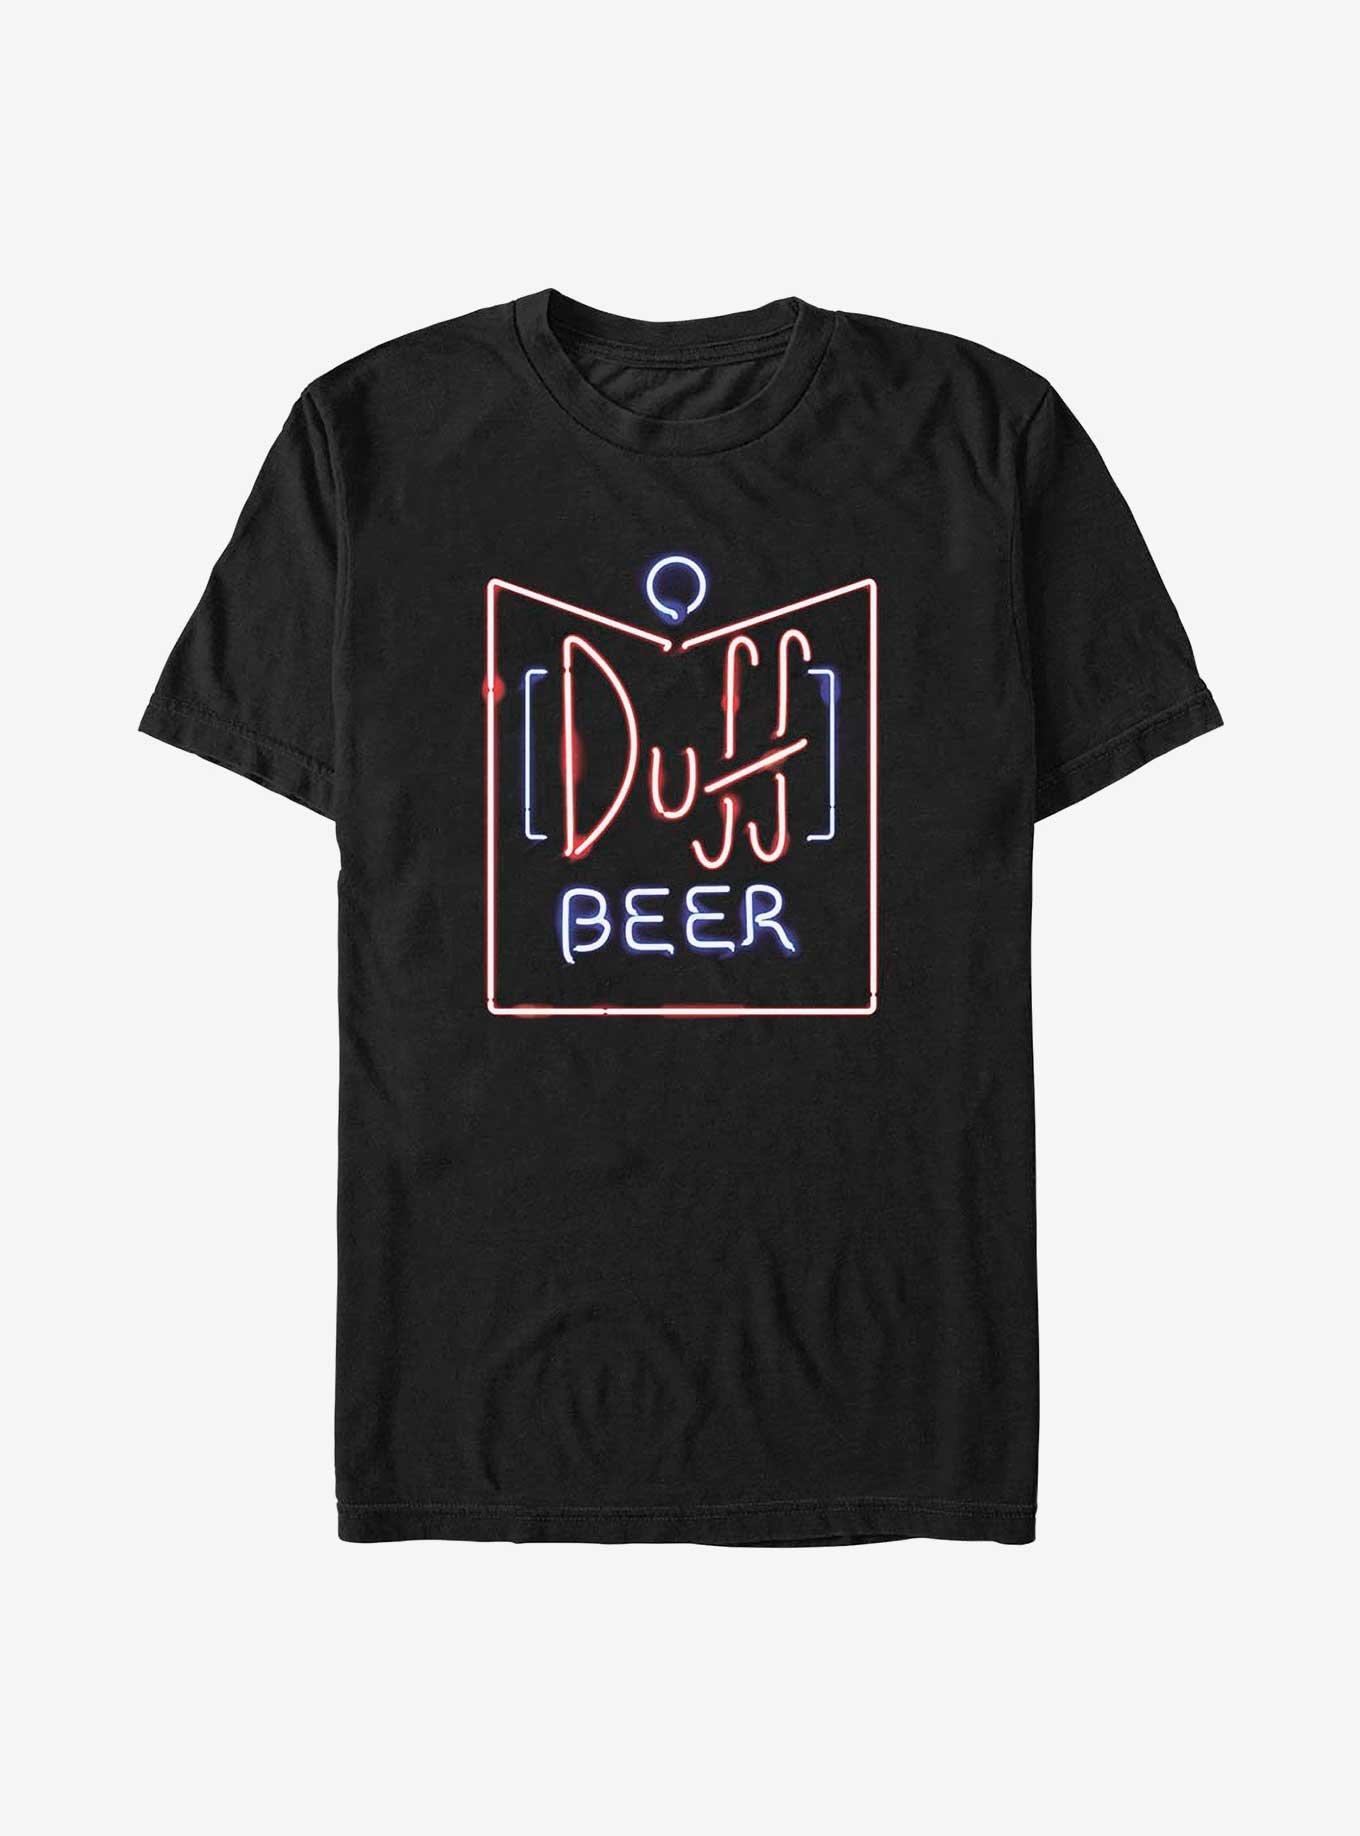 The Simpsons Duff Beer Pub Sign T-Shirt